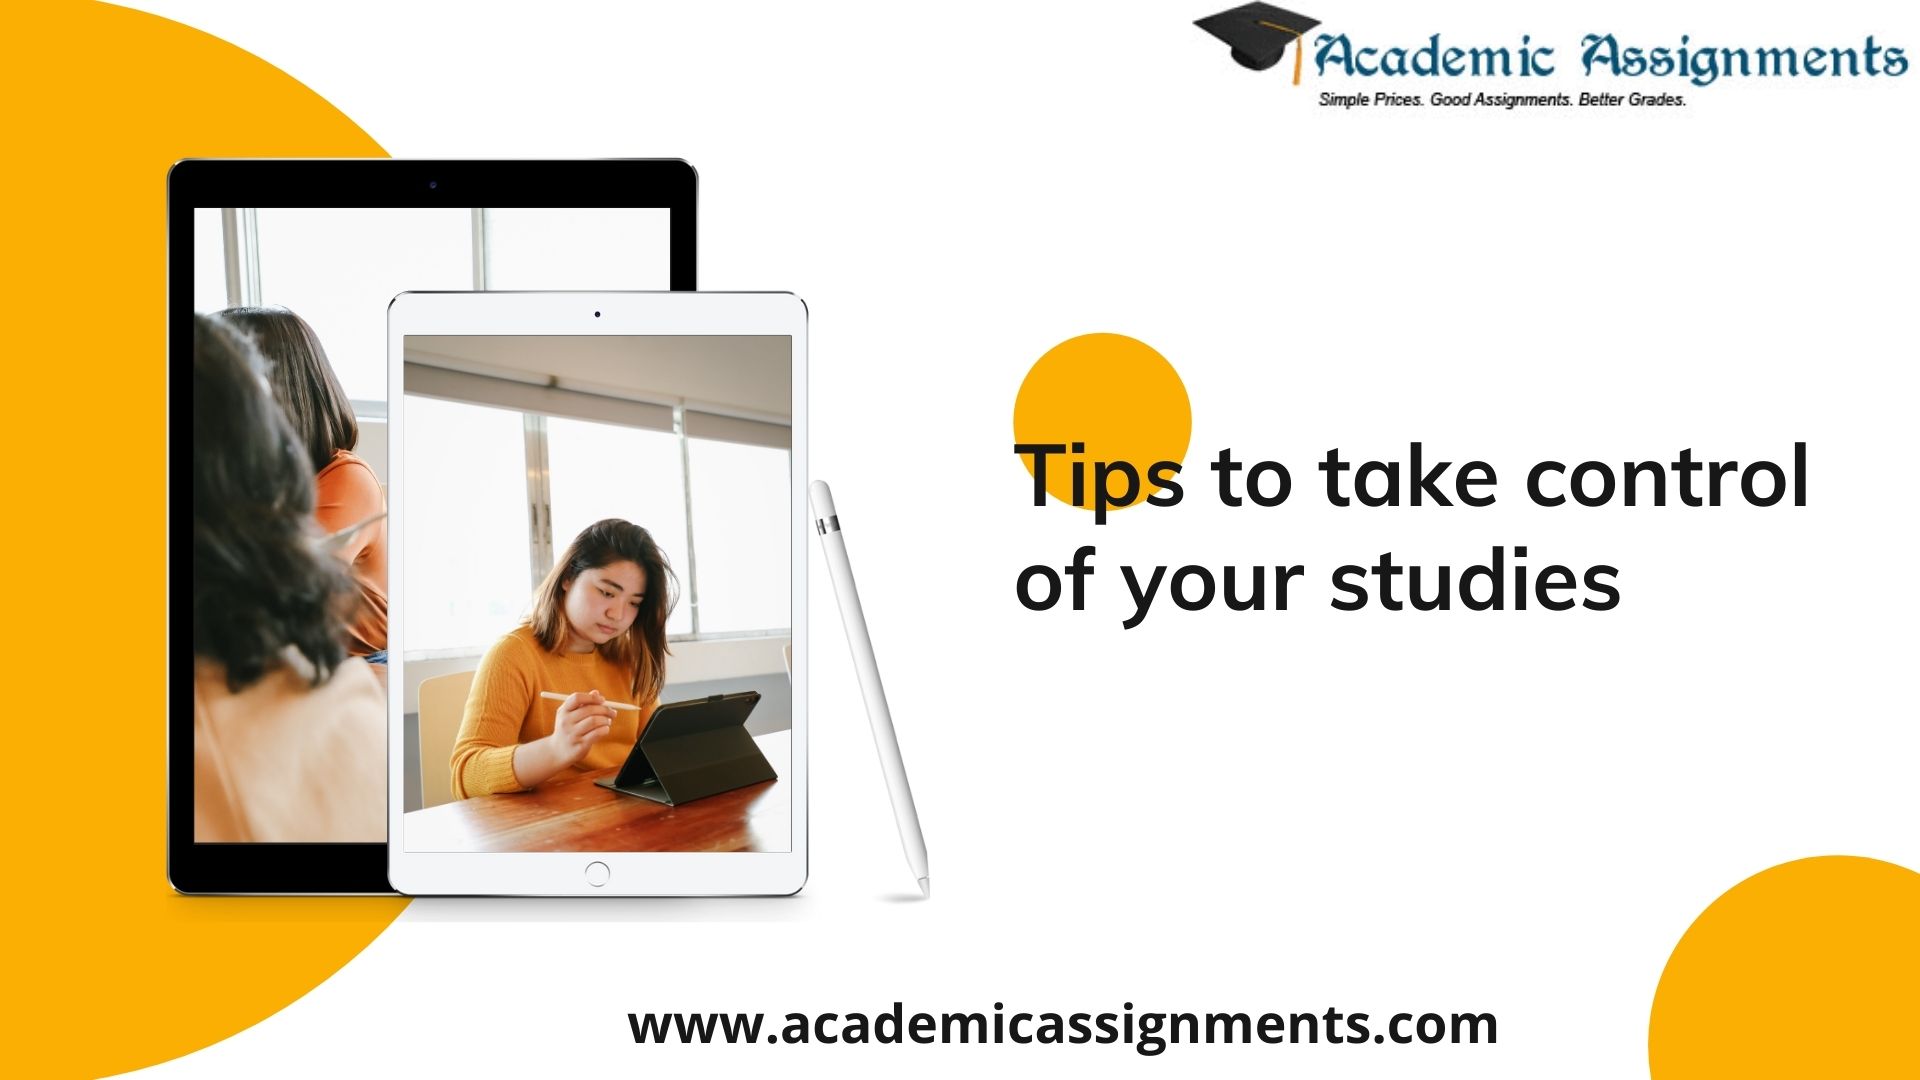 Tips to take control of your studies